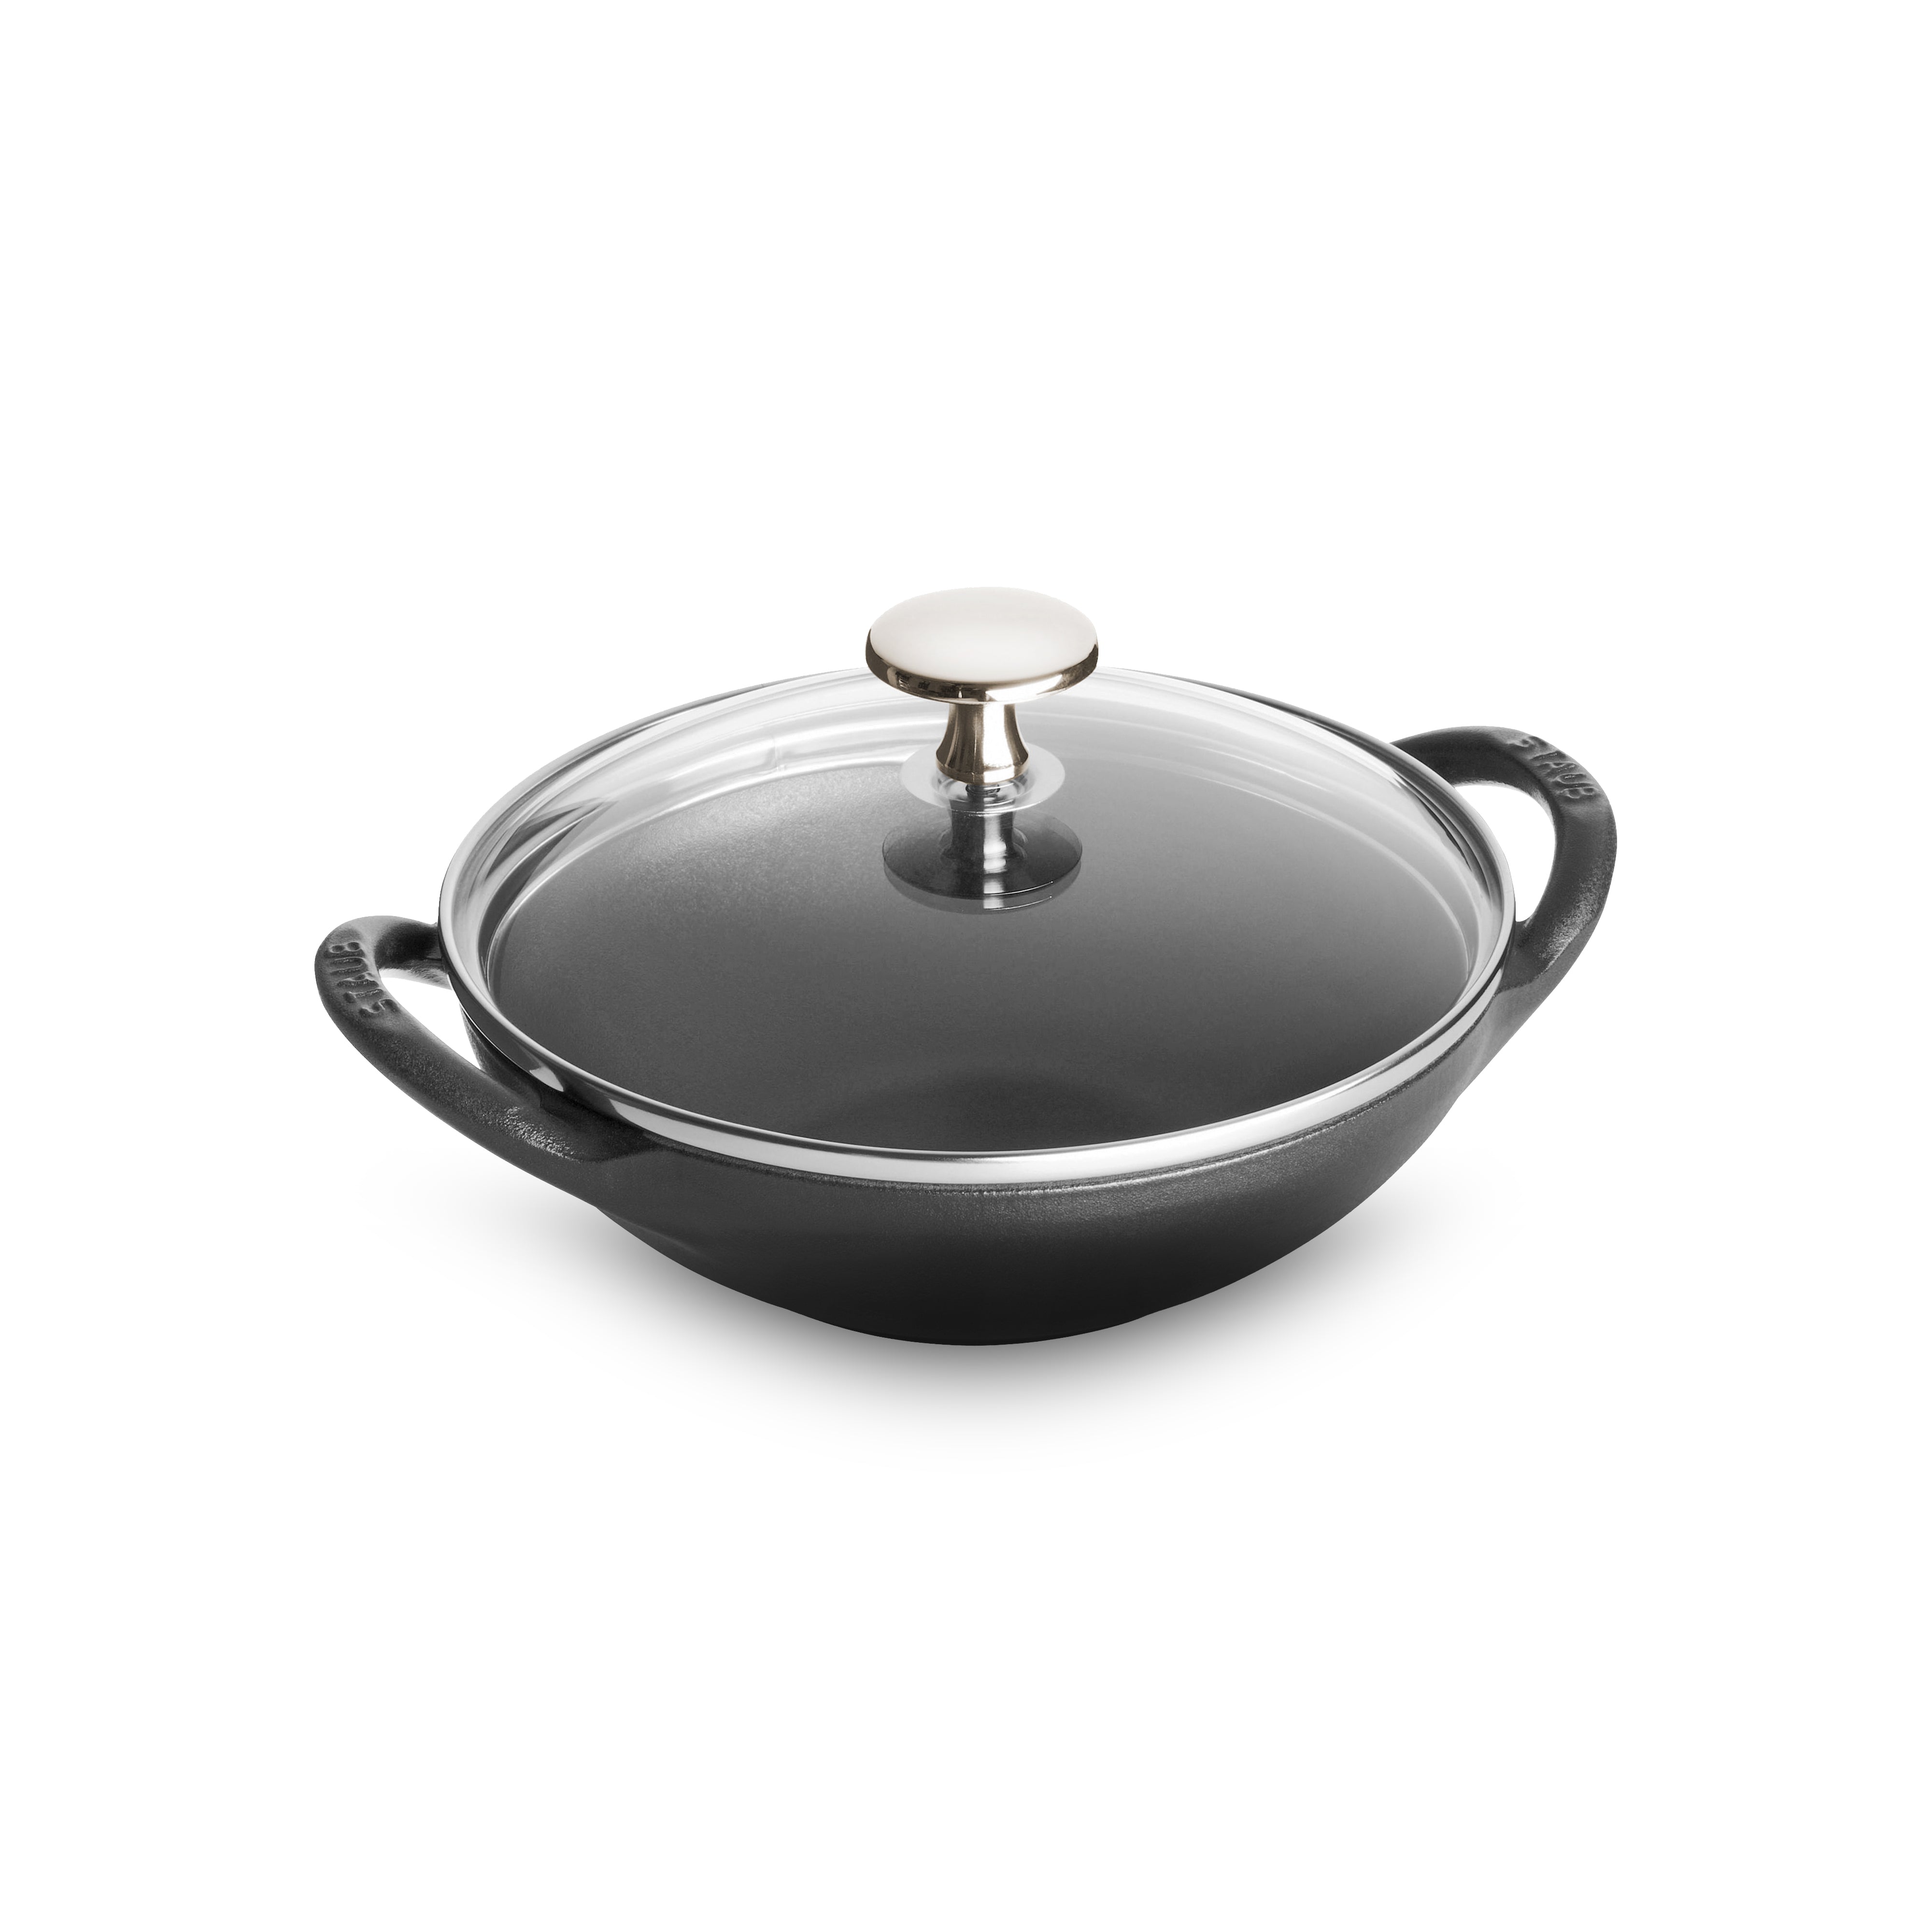 Staub Baby Wok 16cm Campagne Limited Small Iron Pot Glass Lid